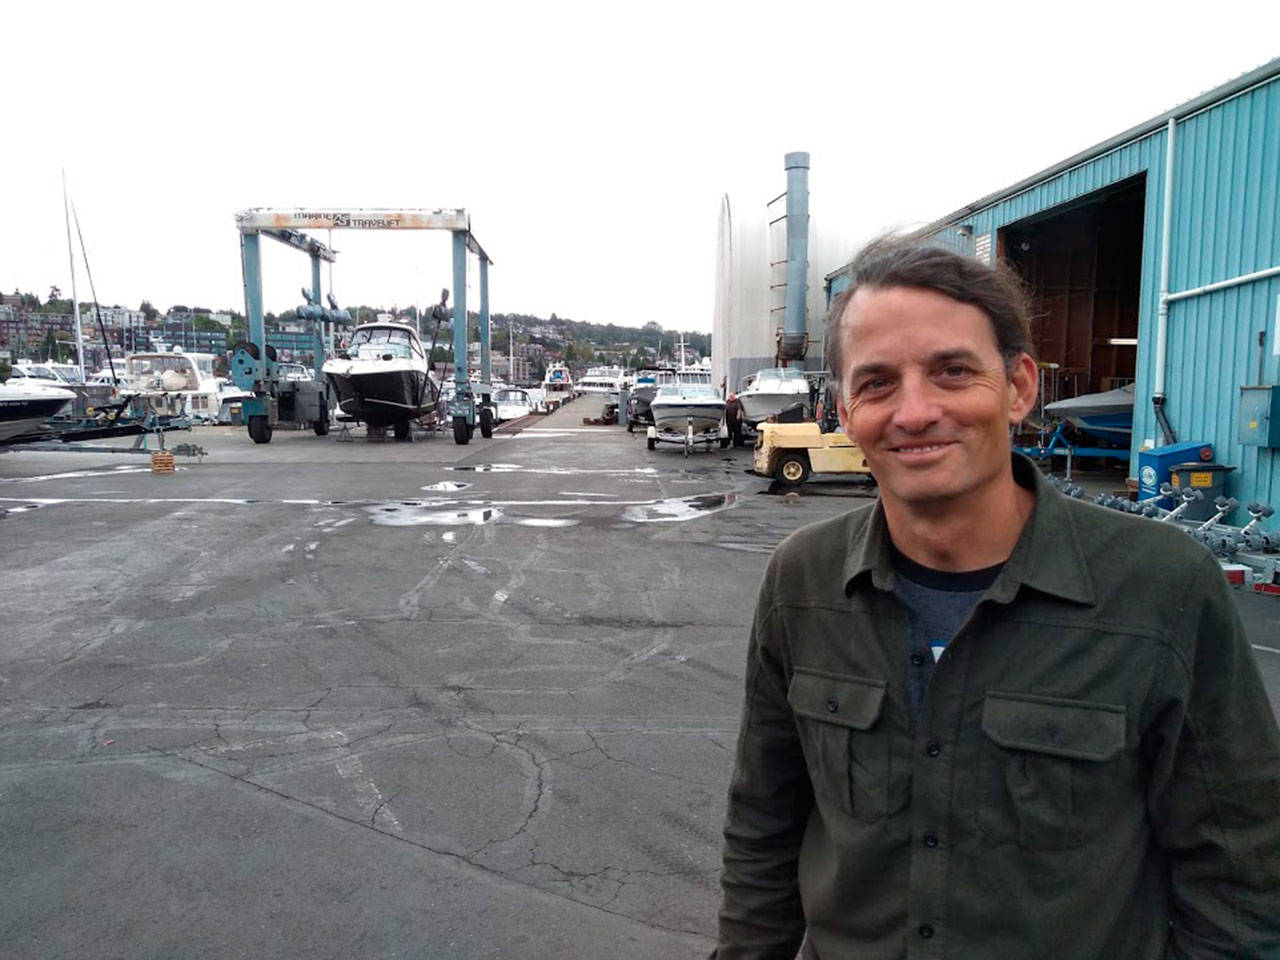 Corey Breuer operates Northwest Boat Disposal and has worked with boats for 25 years. He helps remove boats across the Pacific Northwest. Aaron Kunkler/staff photo